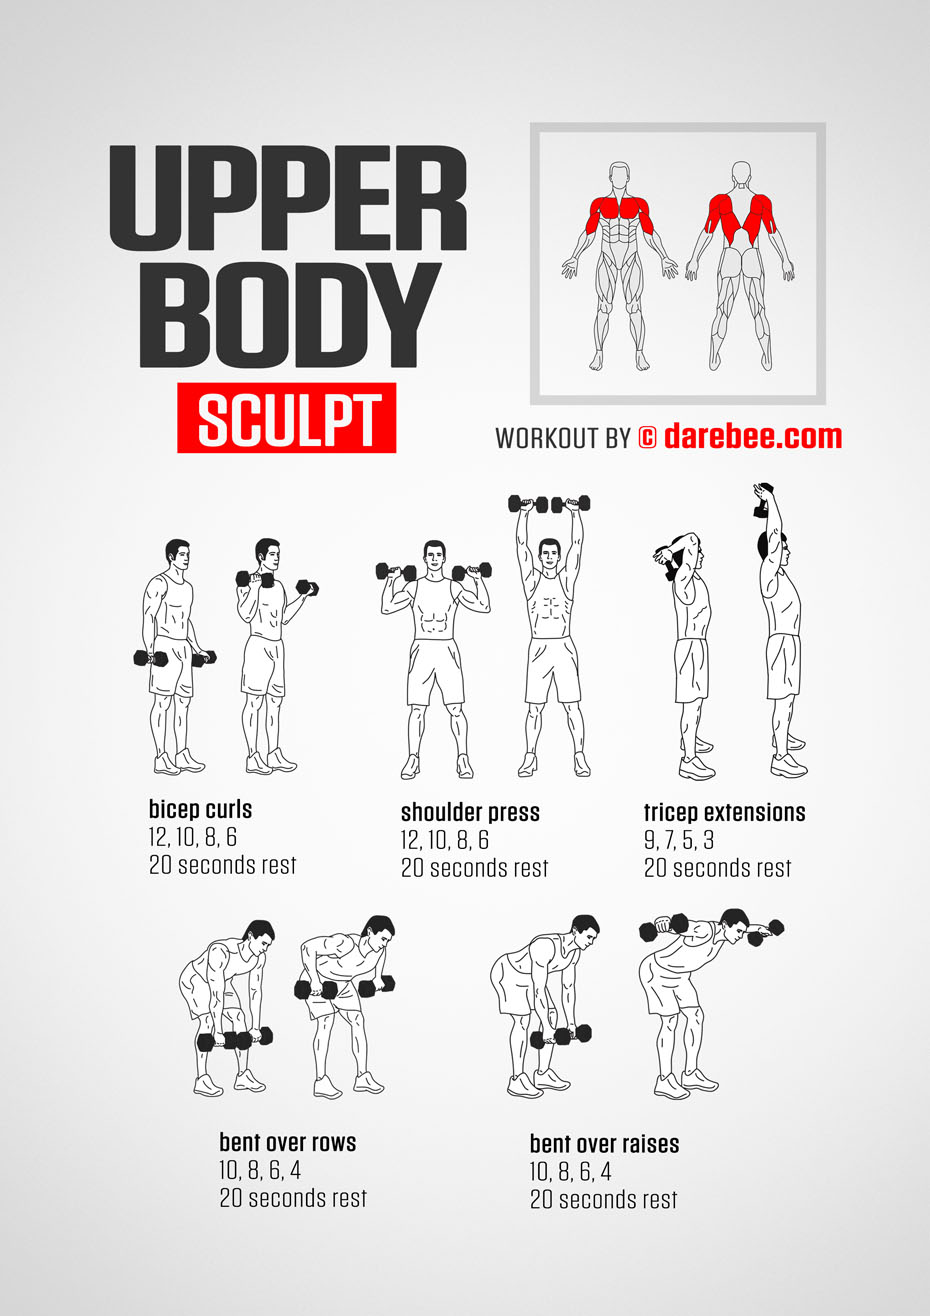 https://darebee.com/images/workouts/upper-body-workout.jpg